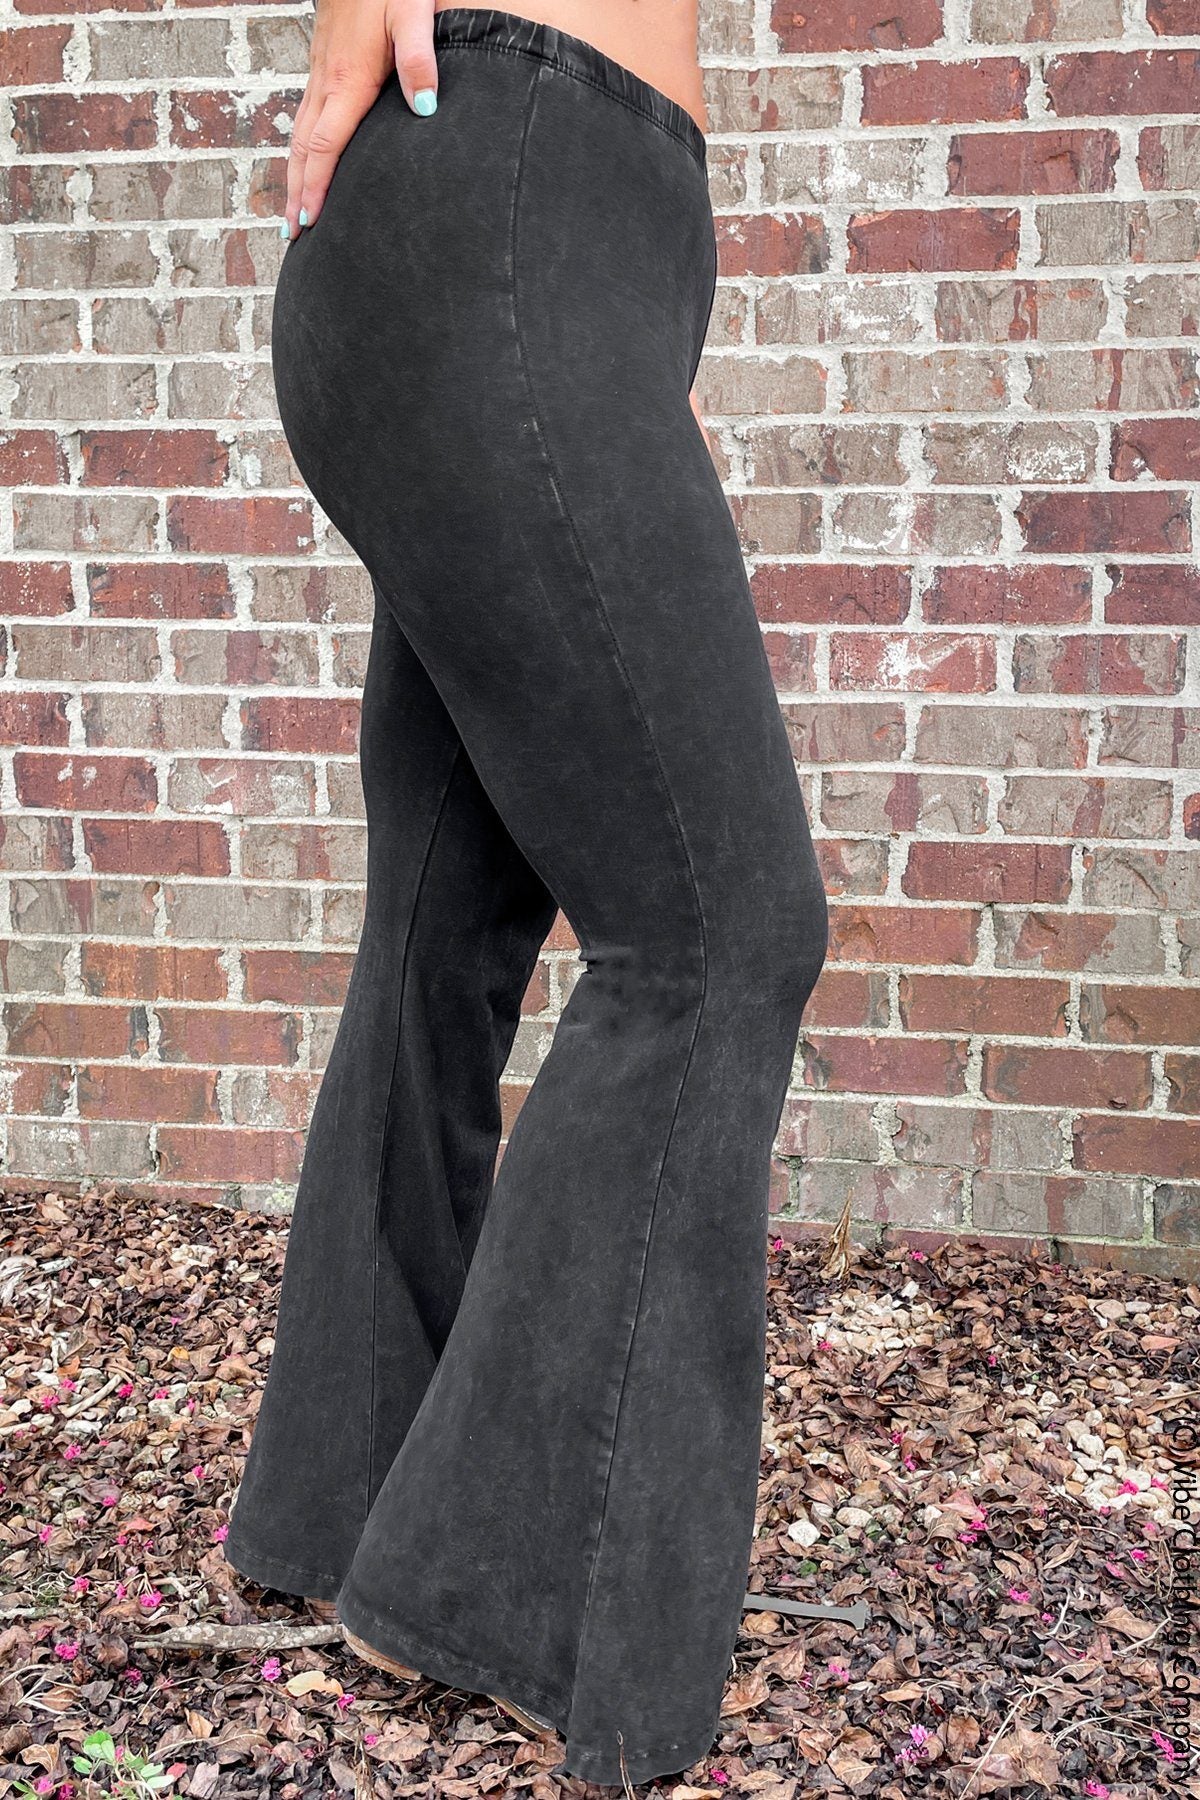 Black Flare Pants | Plus Size Bell Bottoms | Black Bell Bottoms | All American Flares - Jetty Bottoms Vibe Clothing Company 